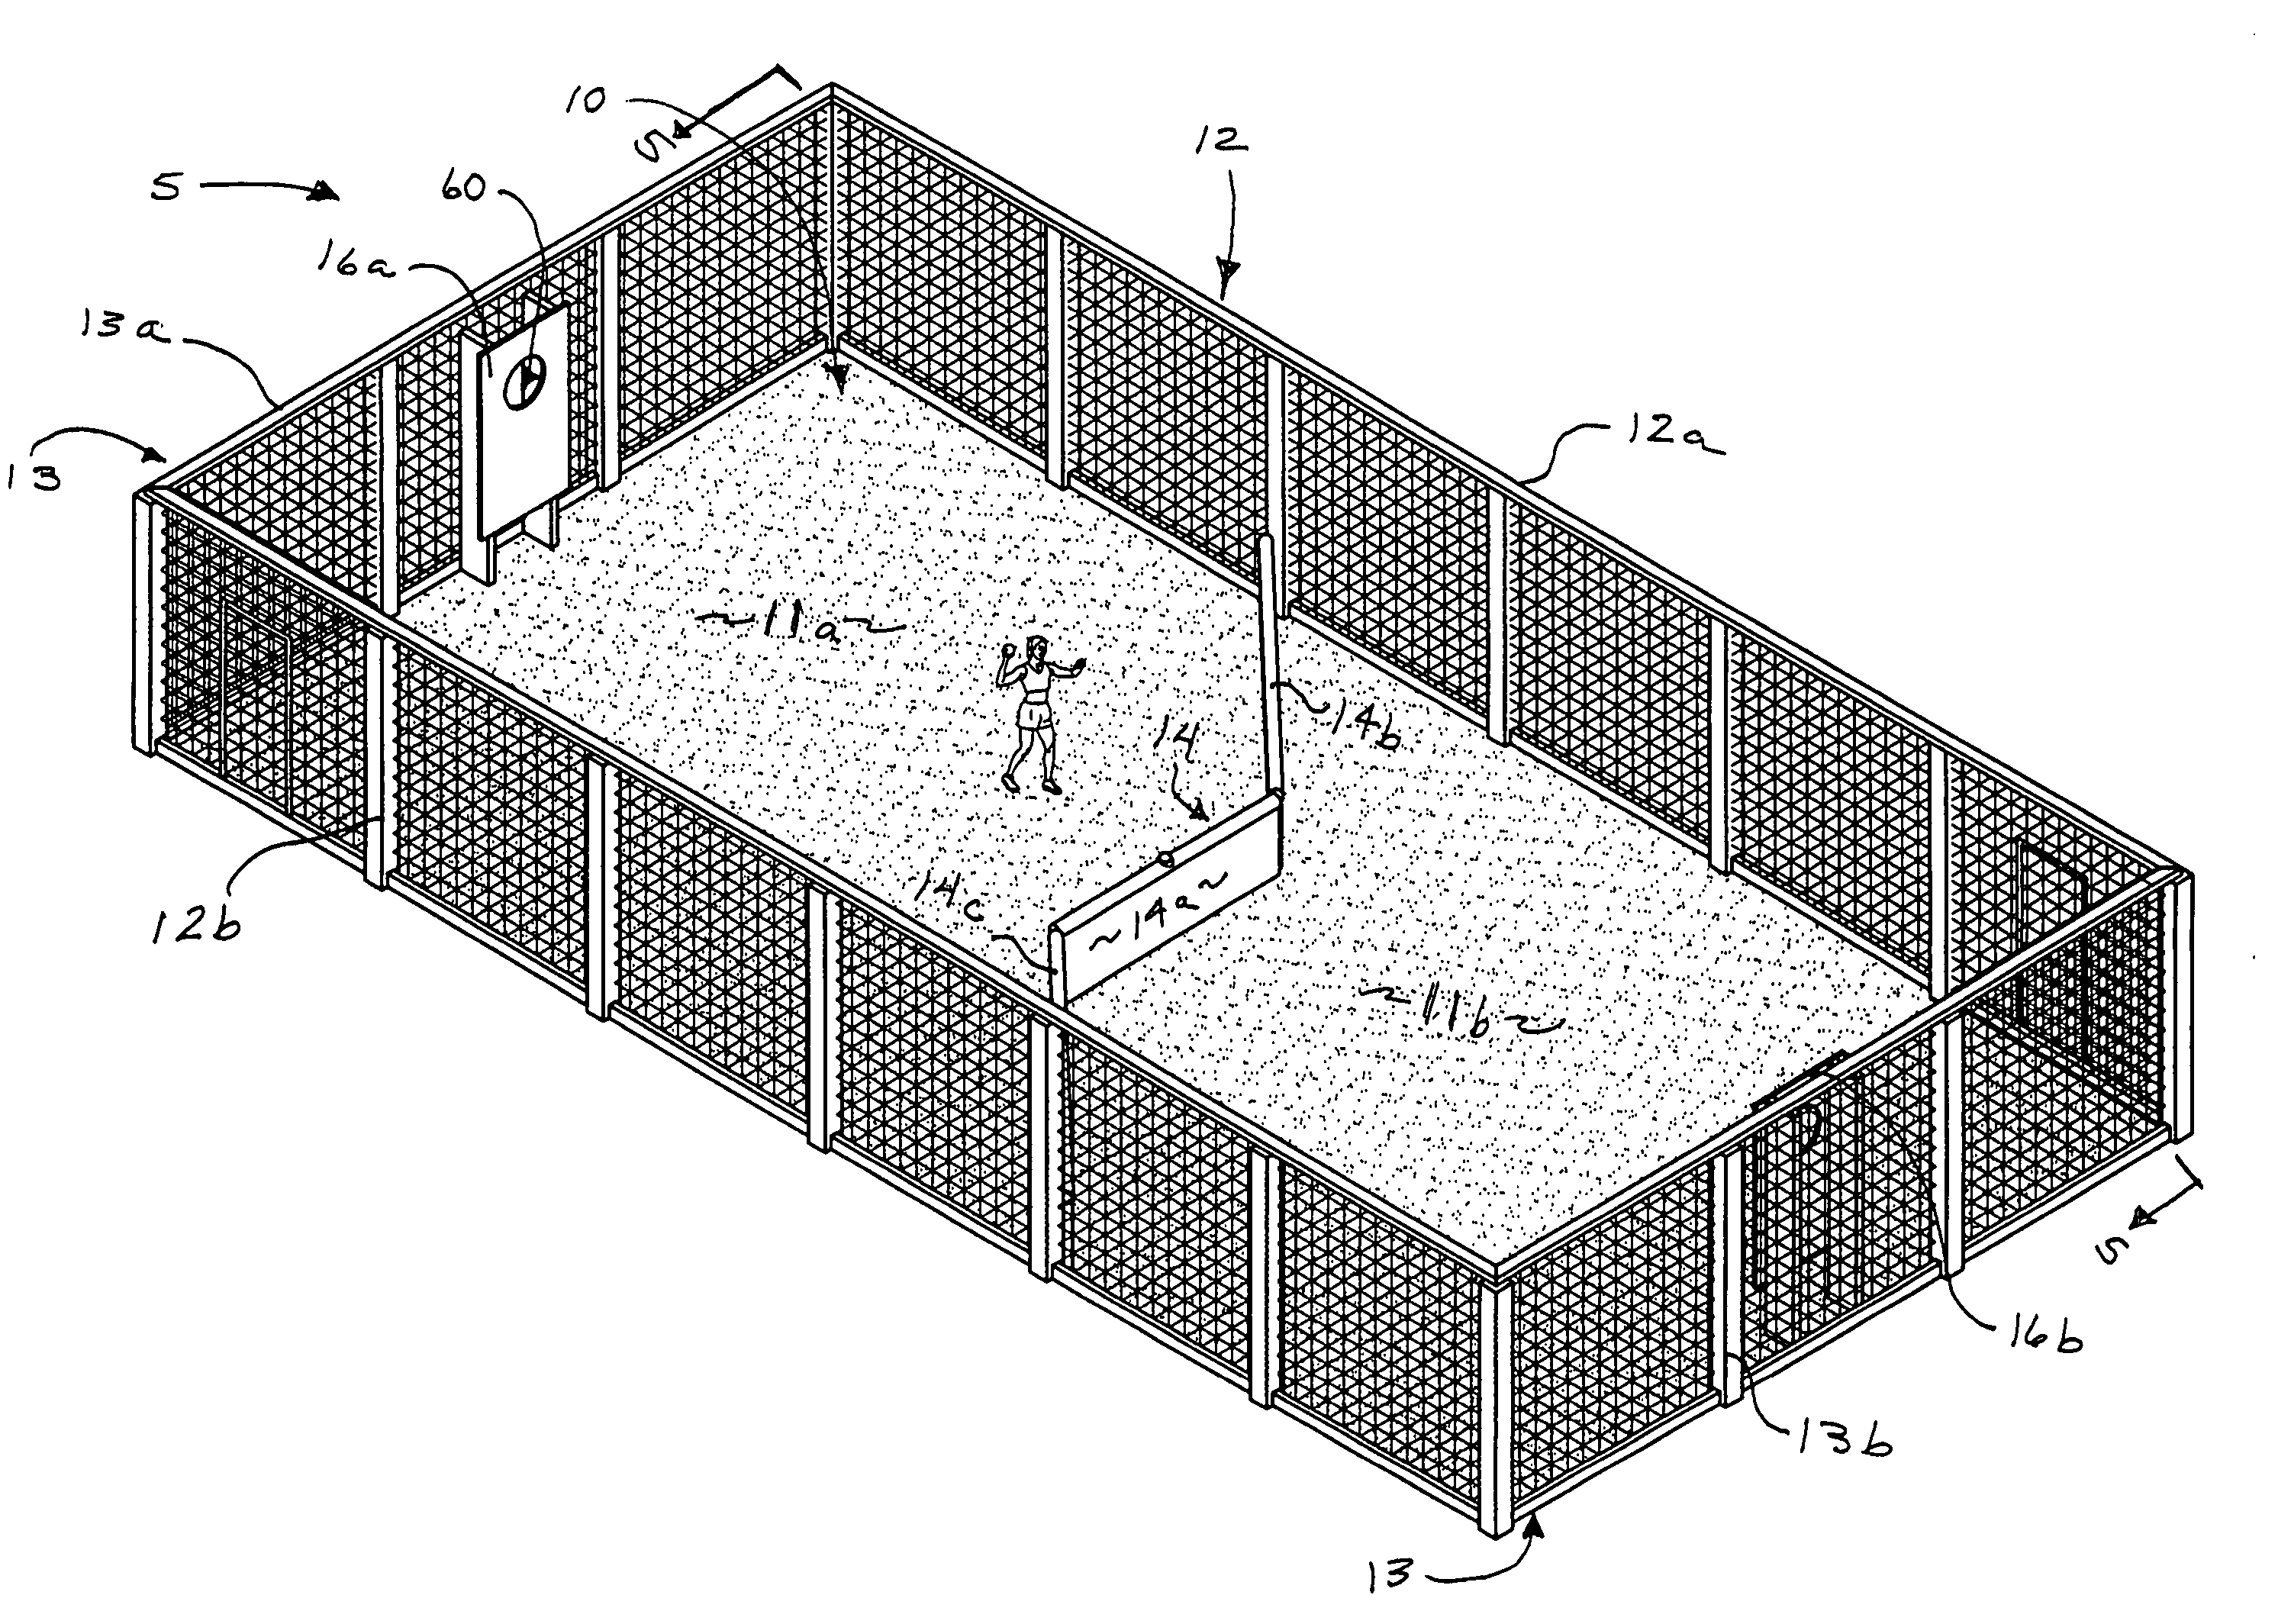 Apparatus and method for a court ball game